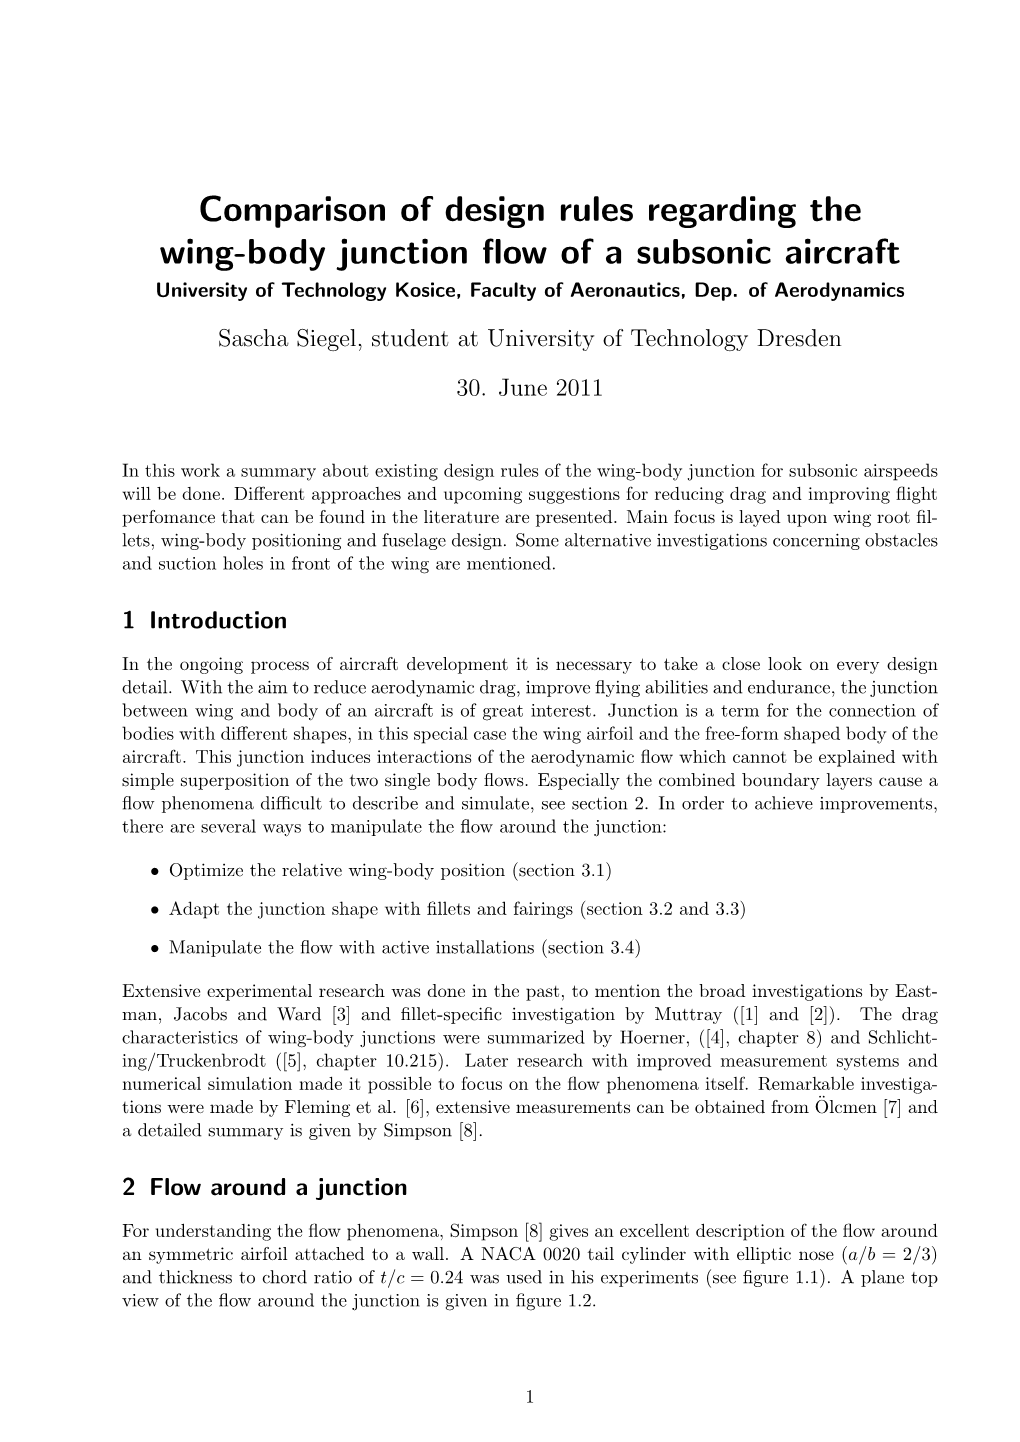 Comparison of Design Rules Regarding the Wing-Body Junction Flow of A